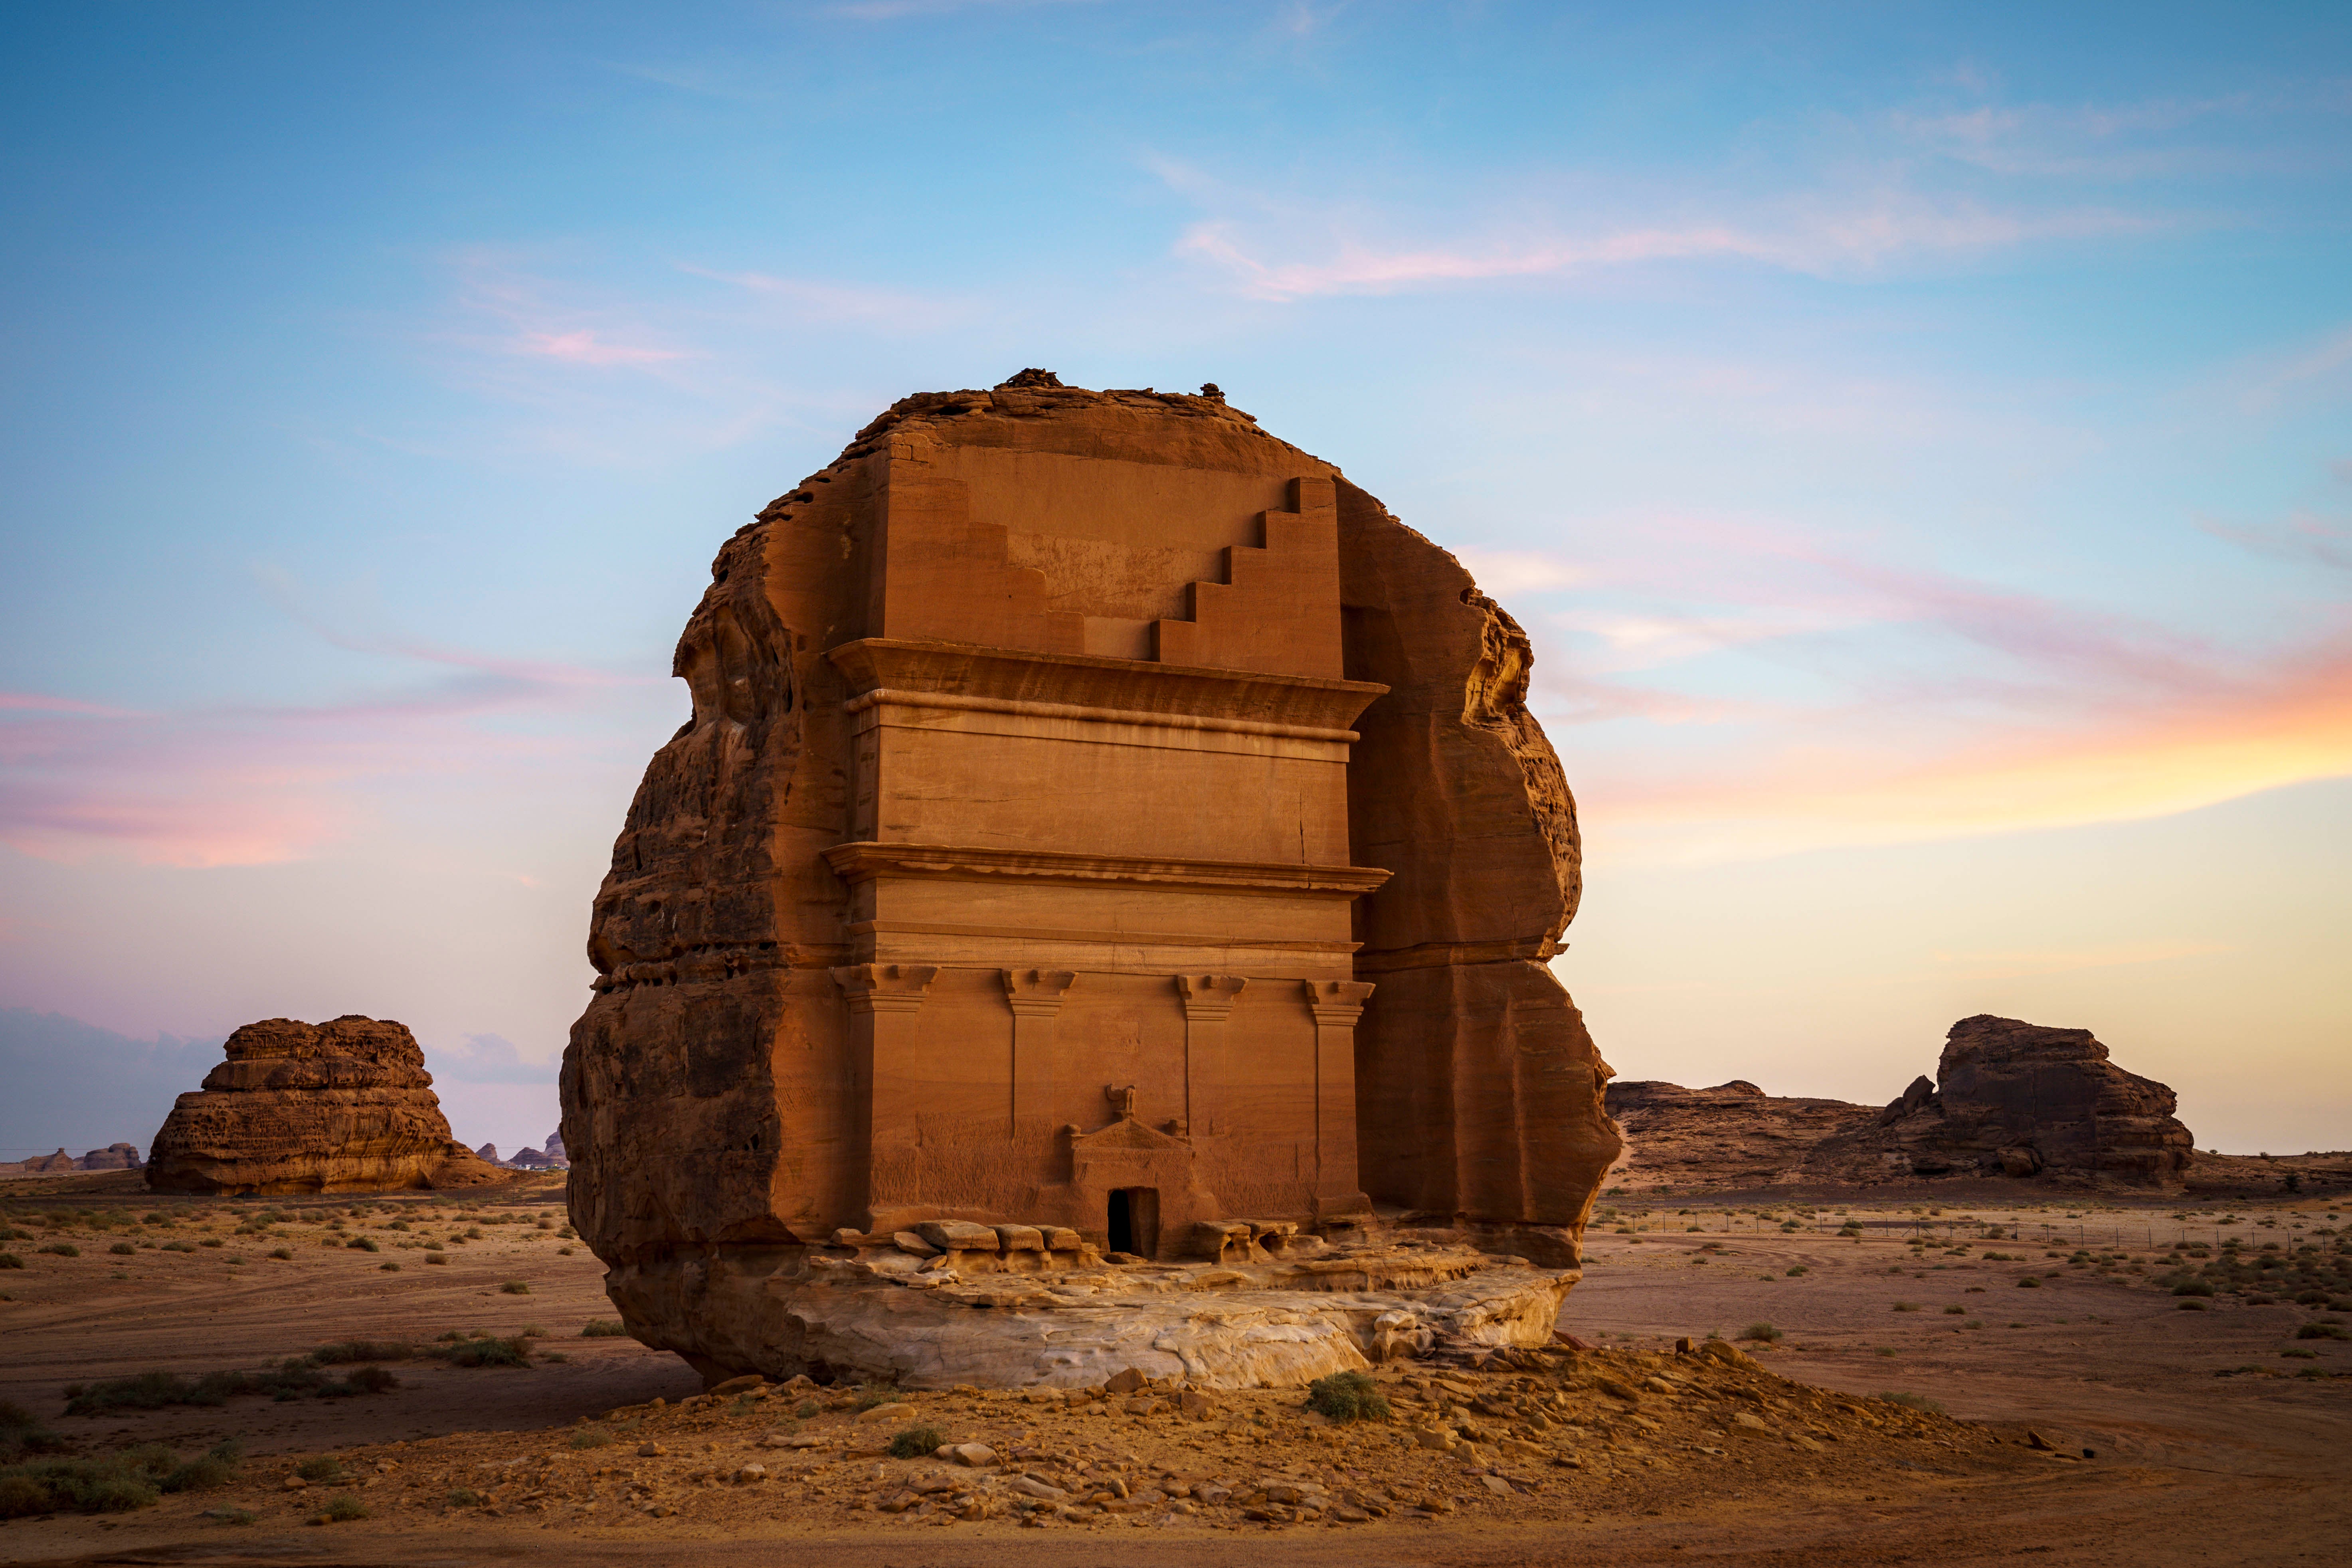 The ancient city of Hegra was built thousands of years ago by the Nabataean people